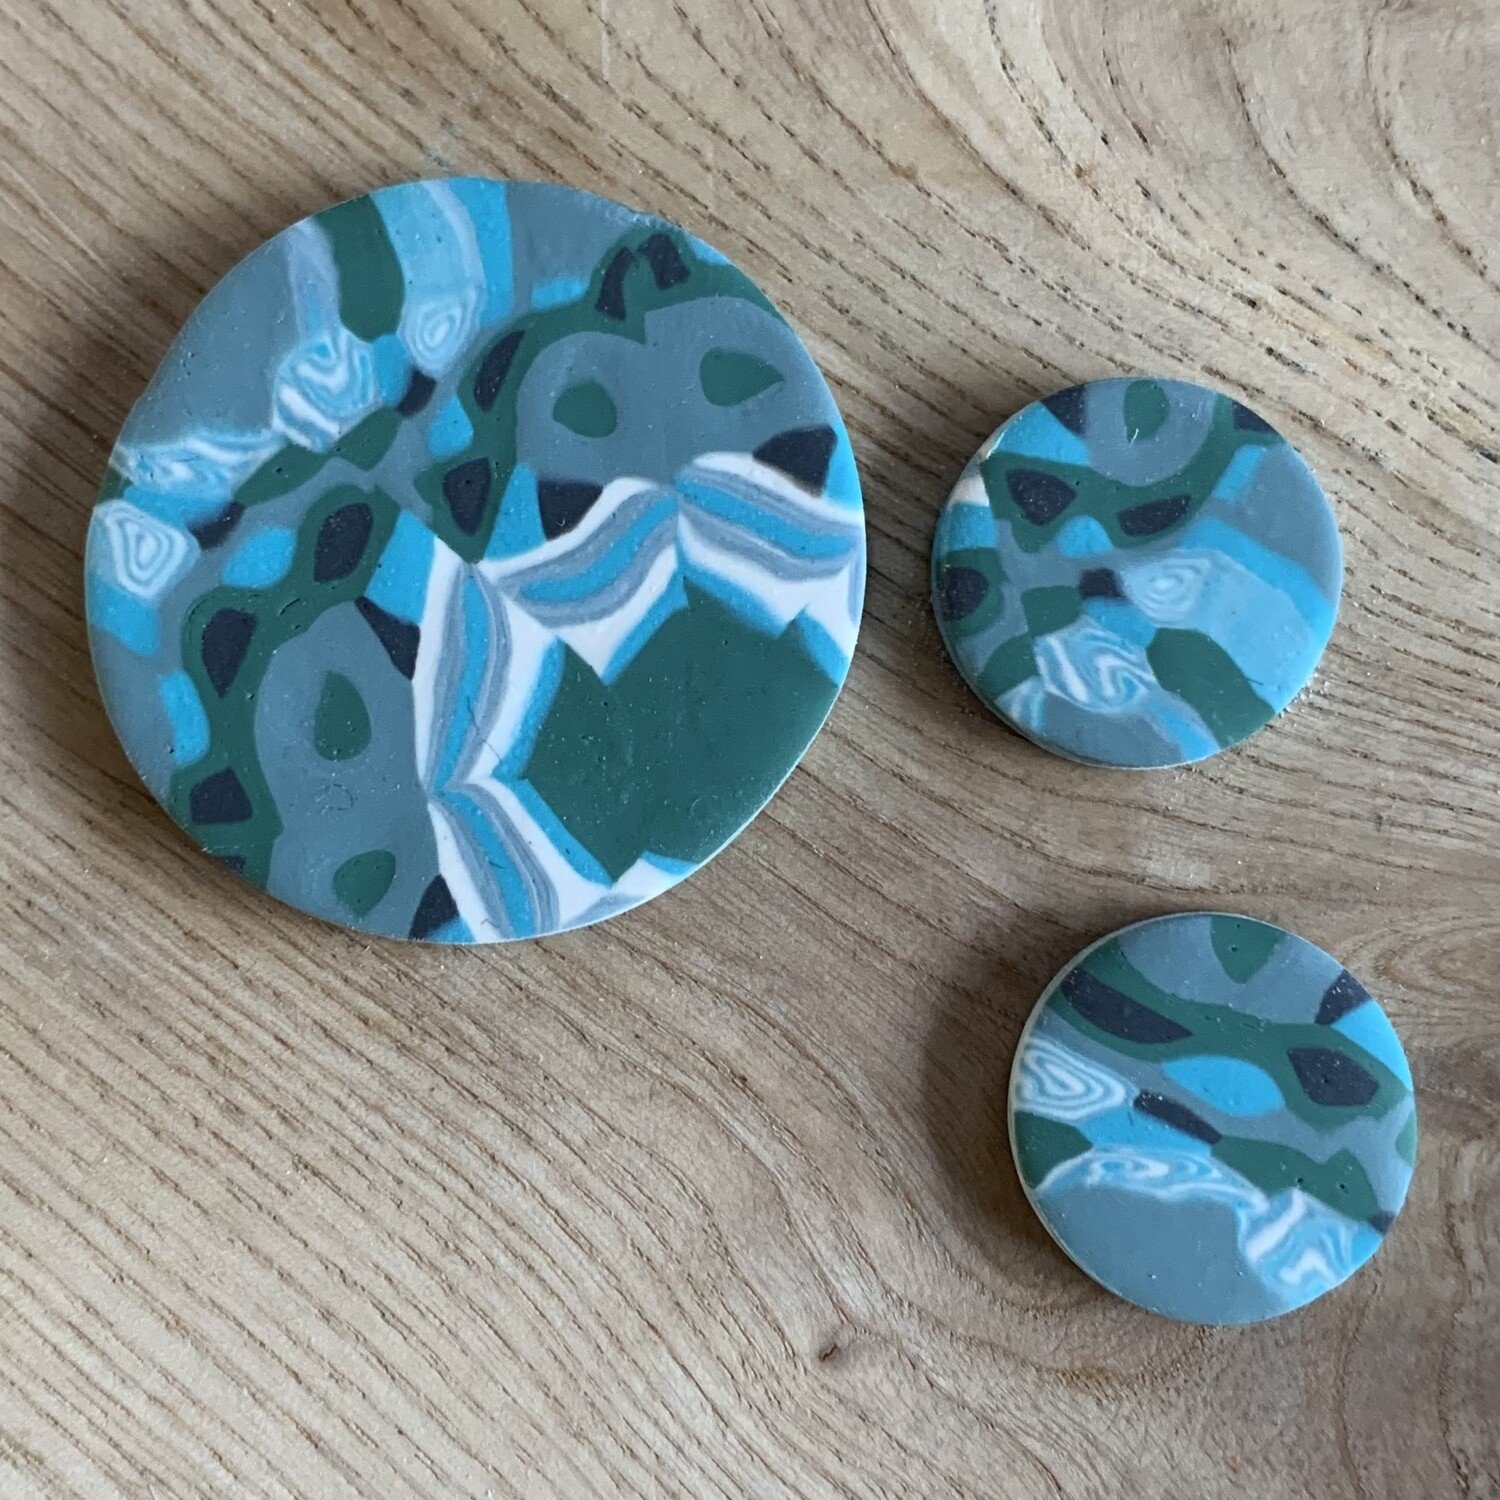 Art & Design Teacher CPD Course - Polymer Clay - One to One - 1 Day